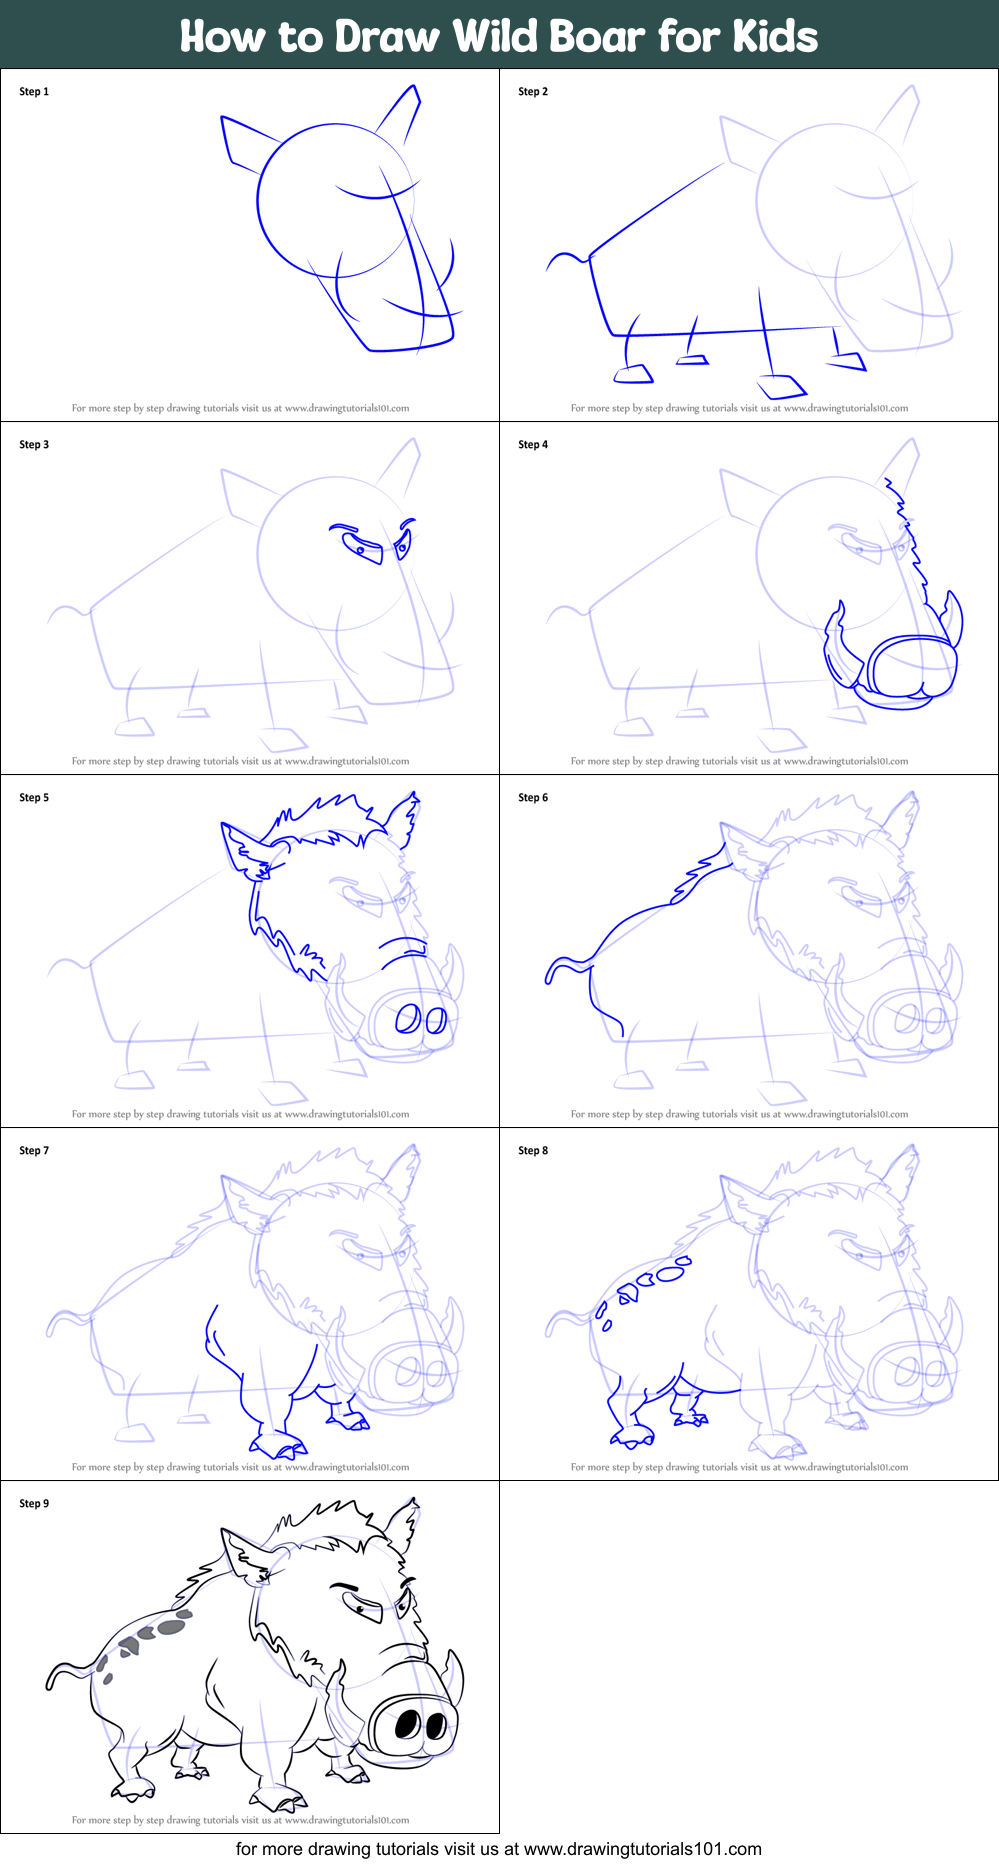 How to Draw Wild Boar for Kids printable step by step drawing sheet